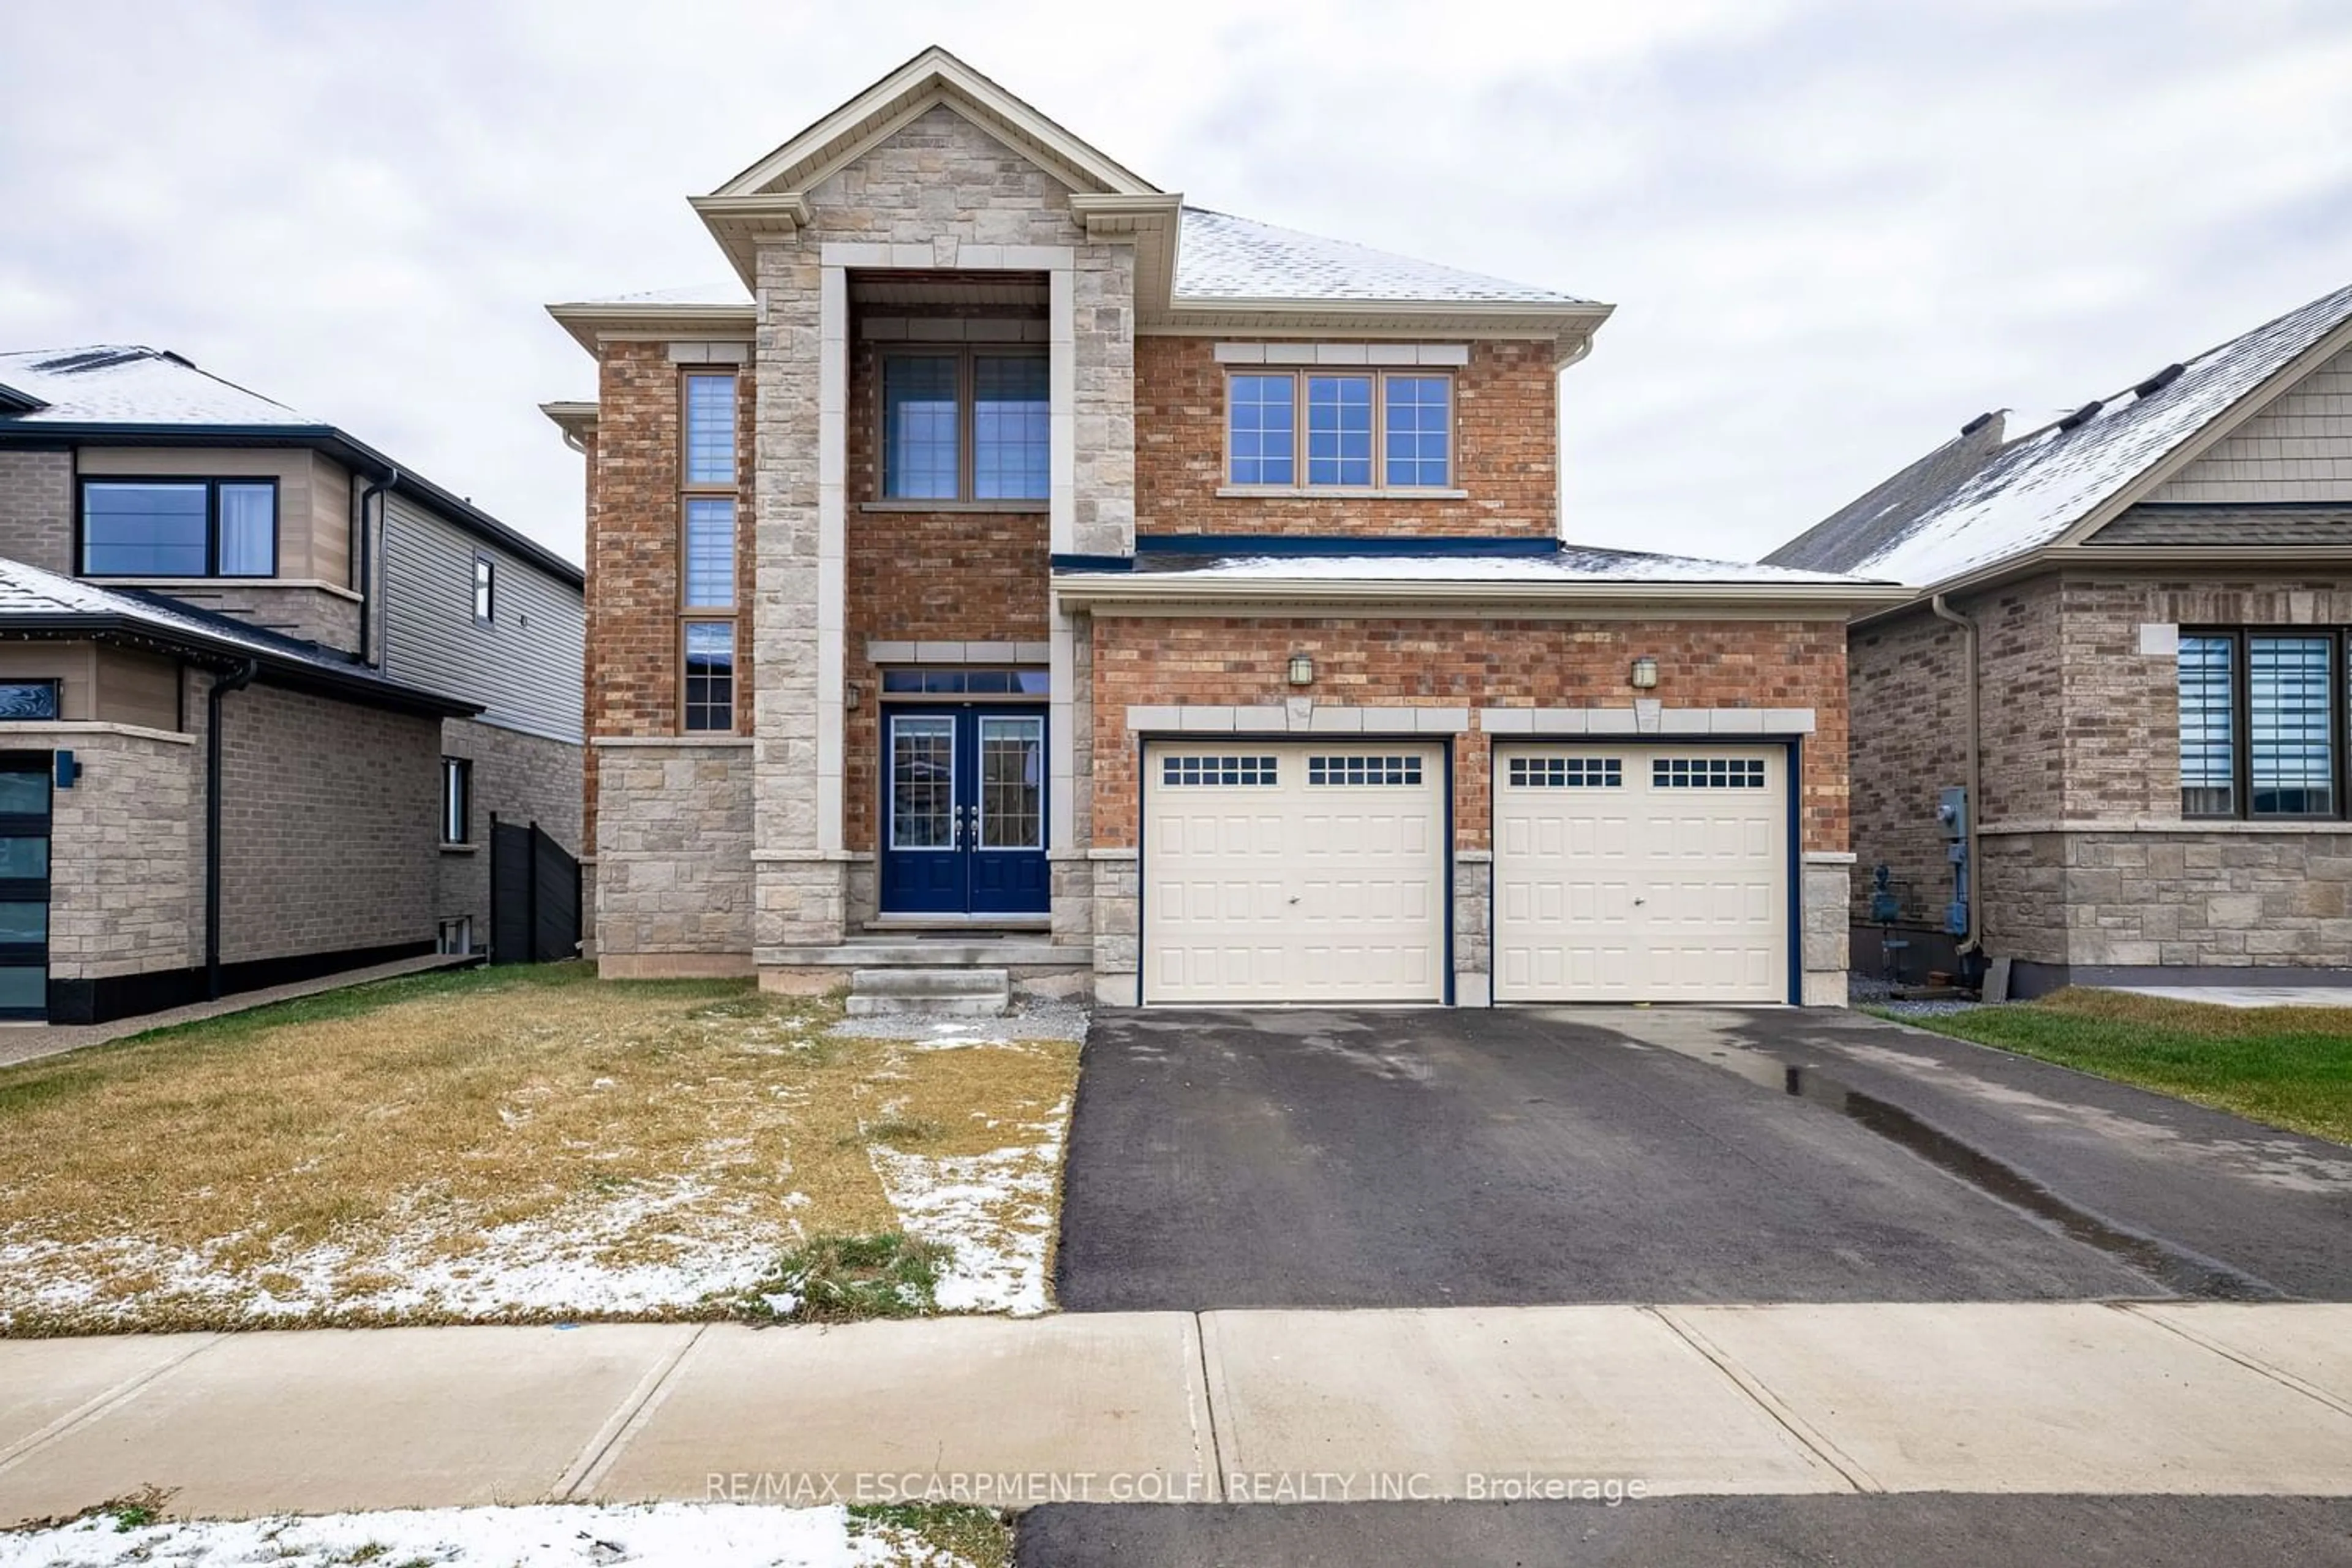 Home with brick exterior material for 192 Shoreview Dr, Welland Ontario L3B 0H3